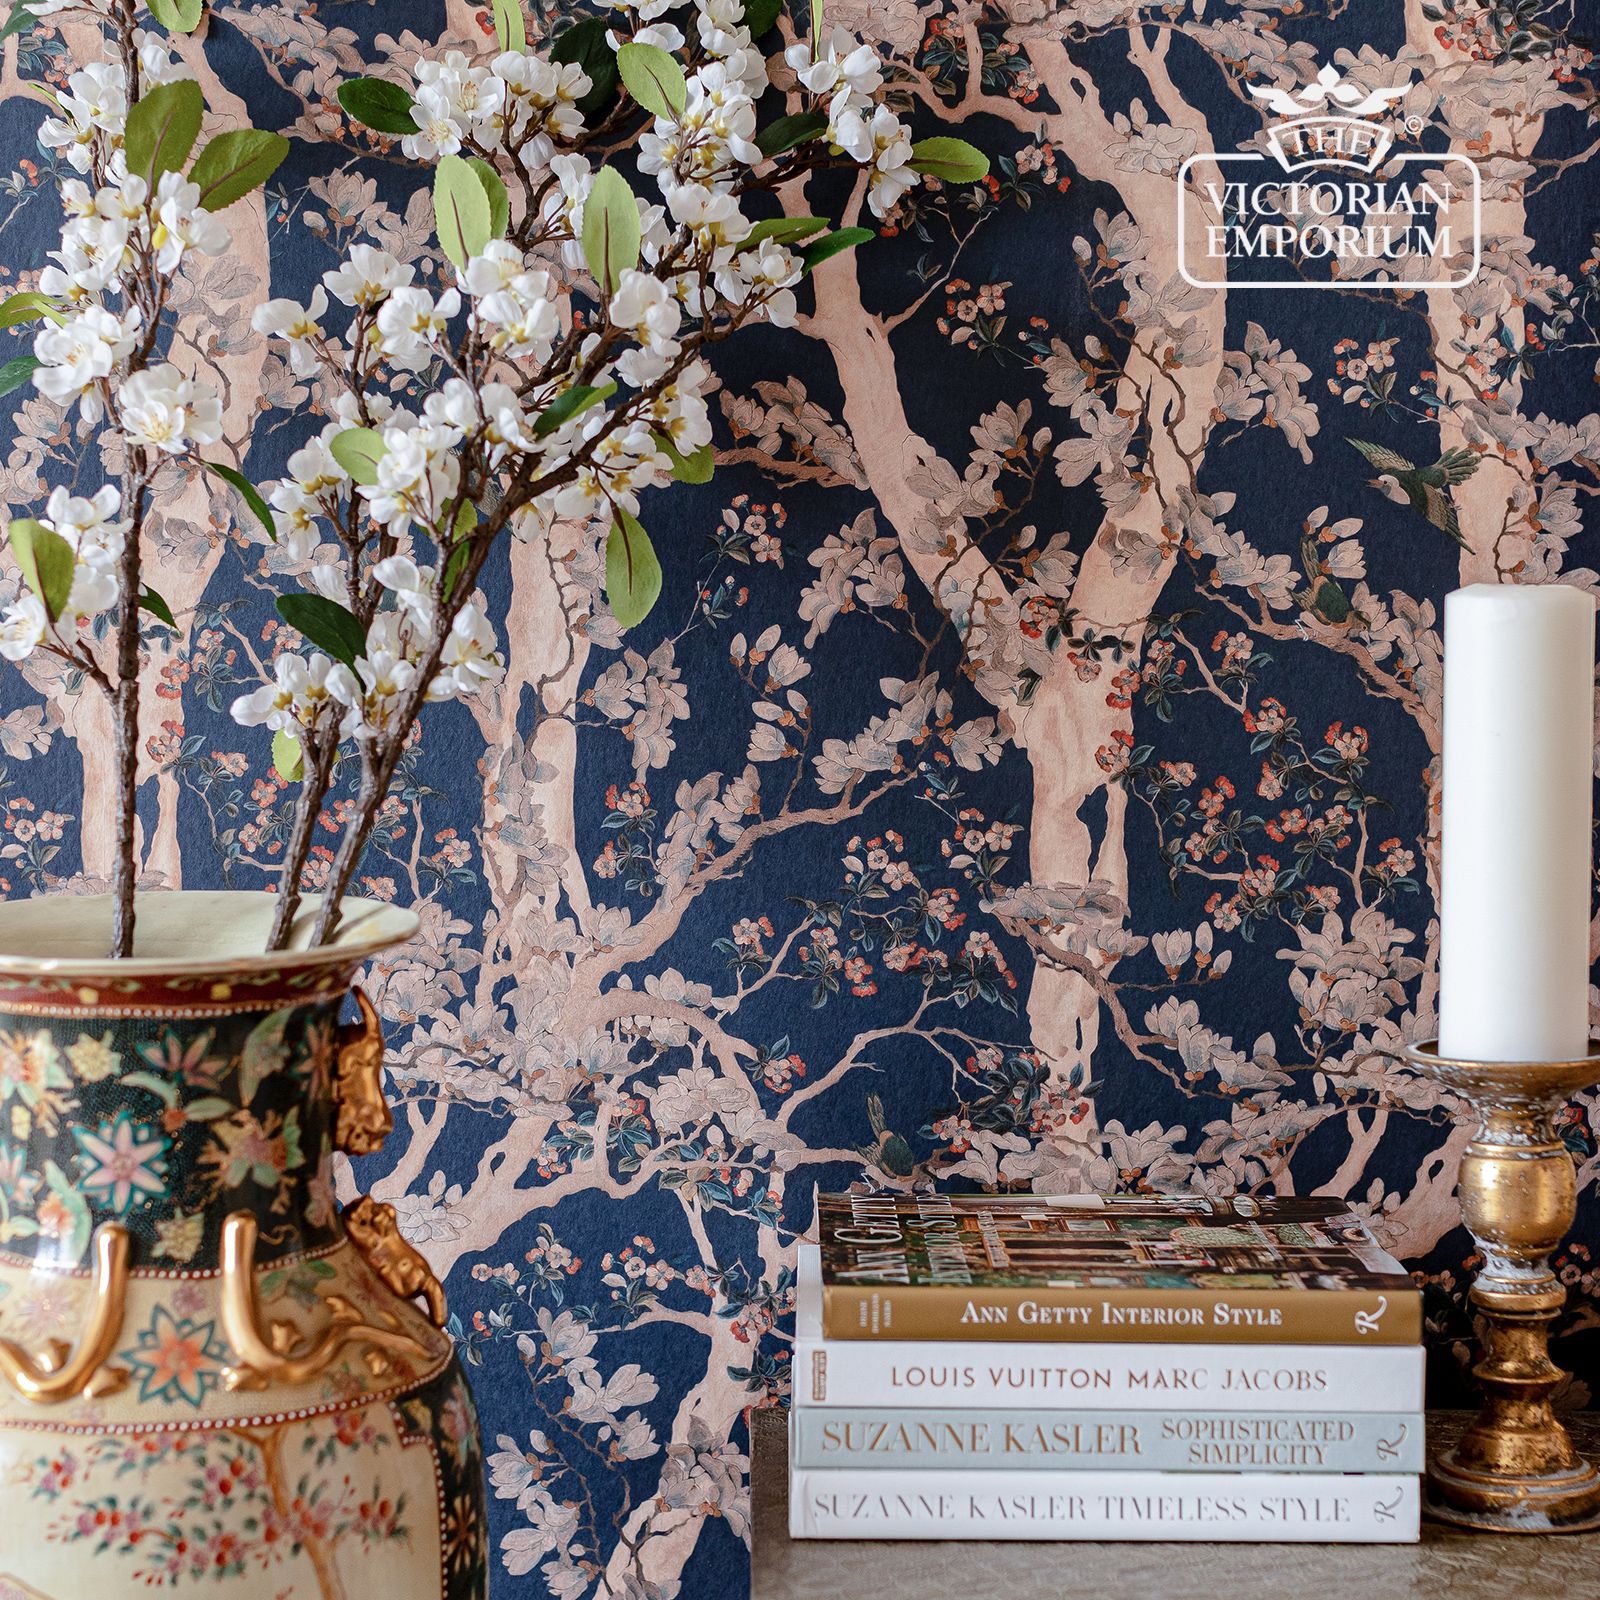 THE SACRED TREE Wallpaper - Products